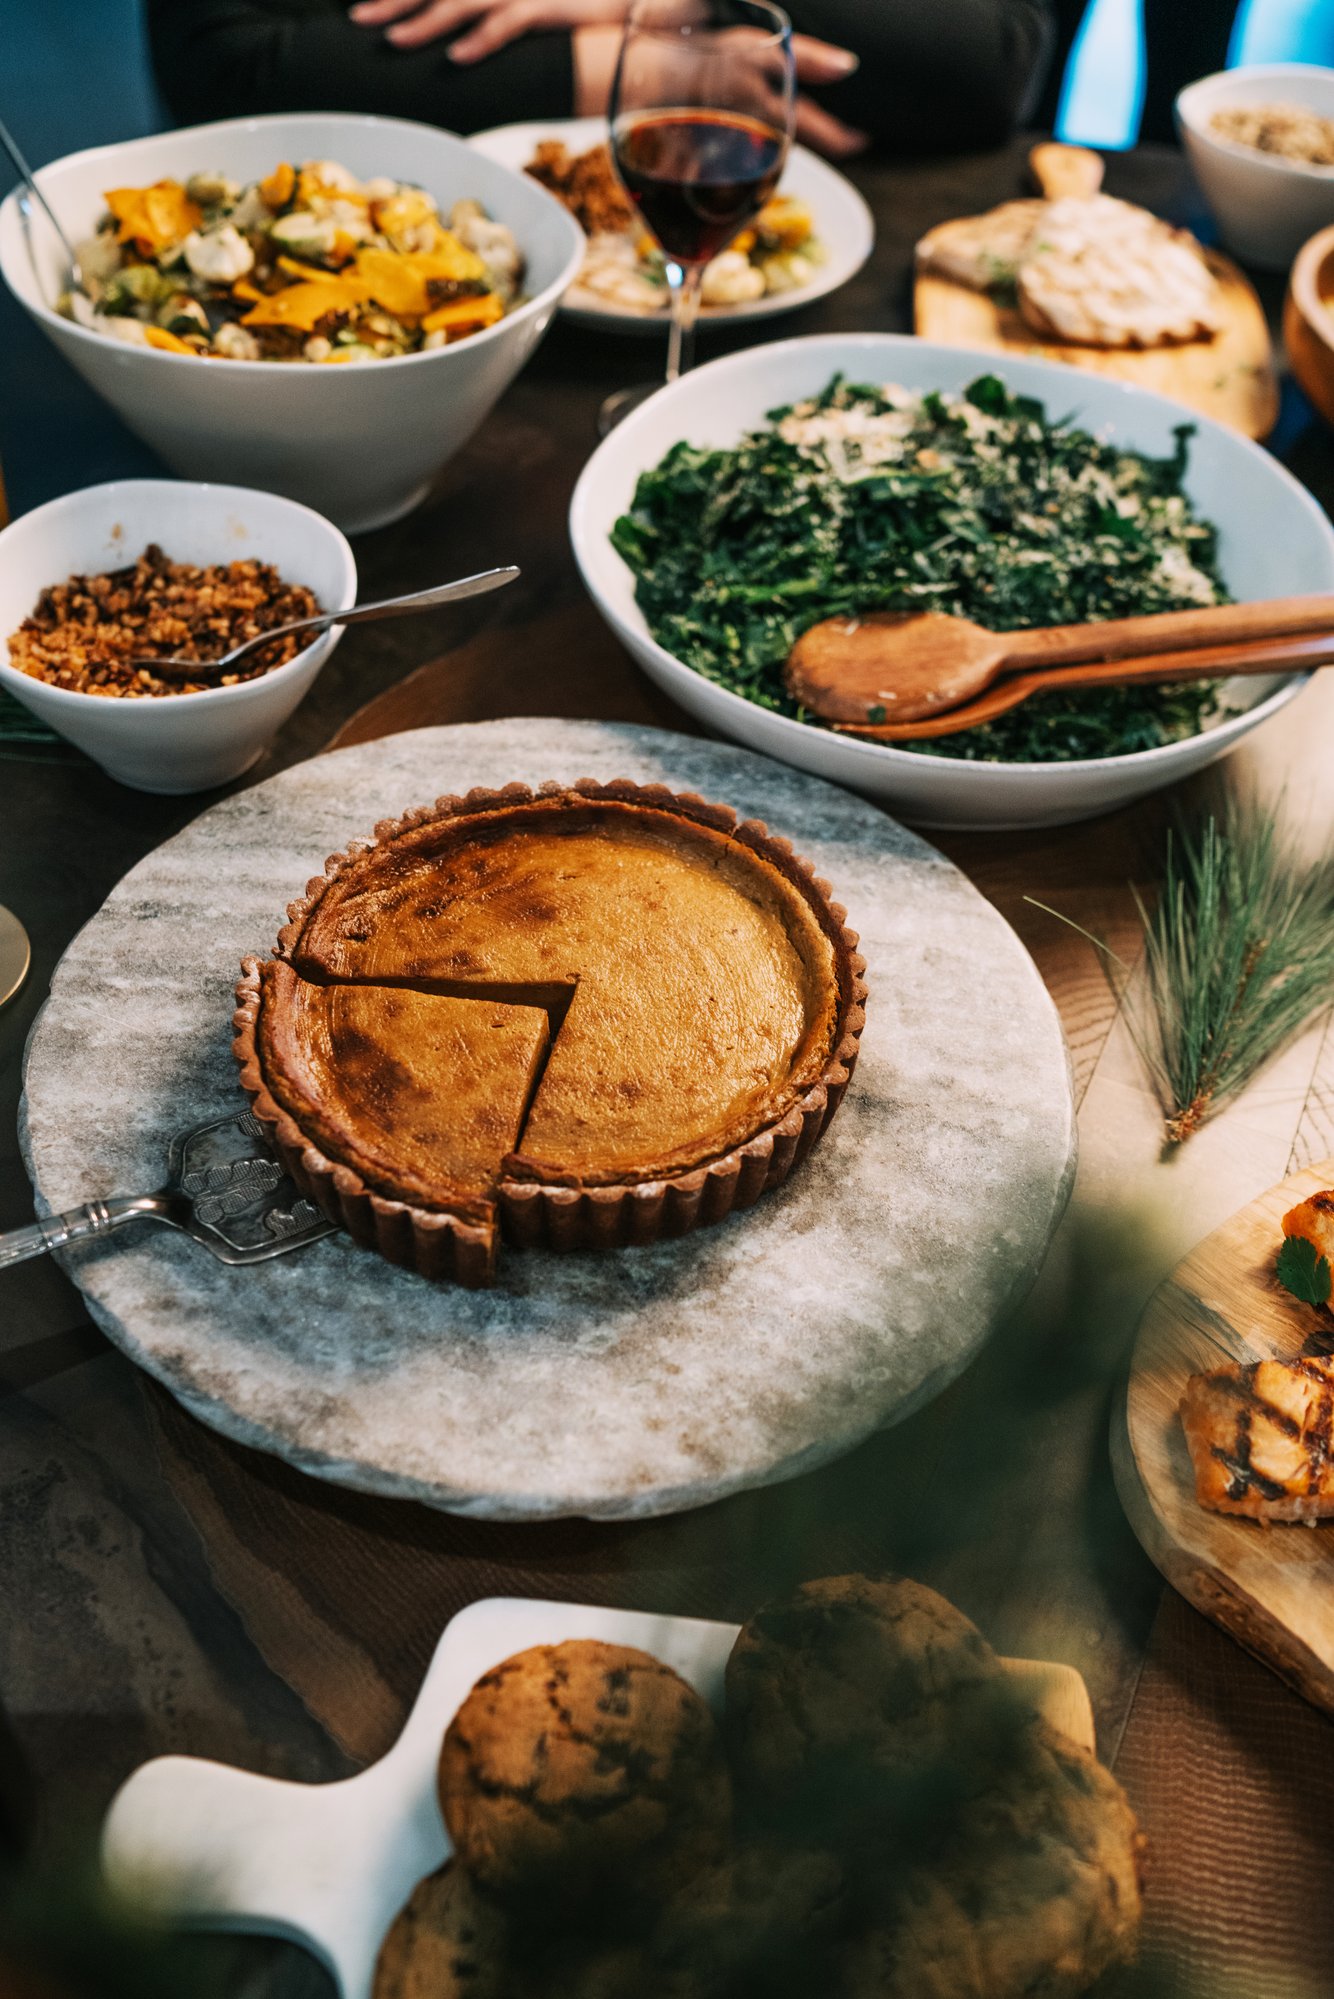 pies and sides image 